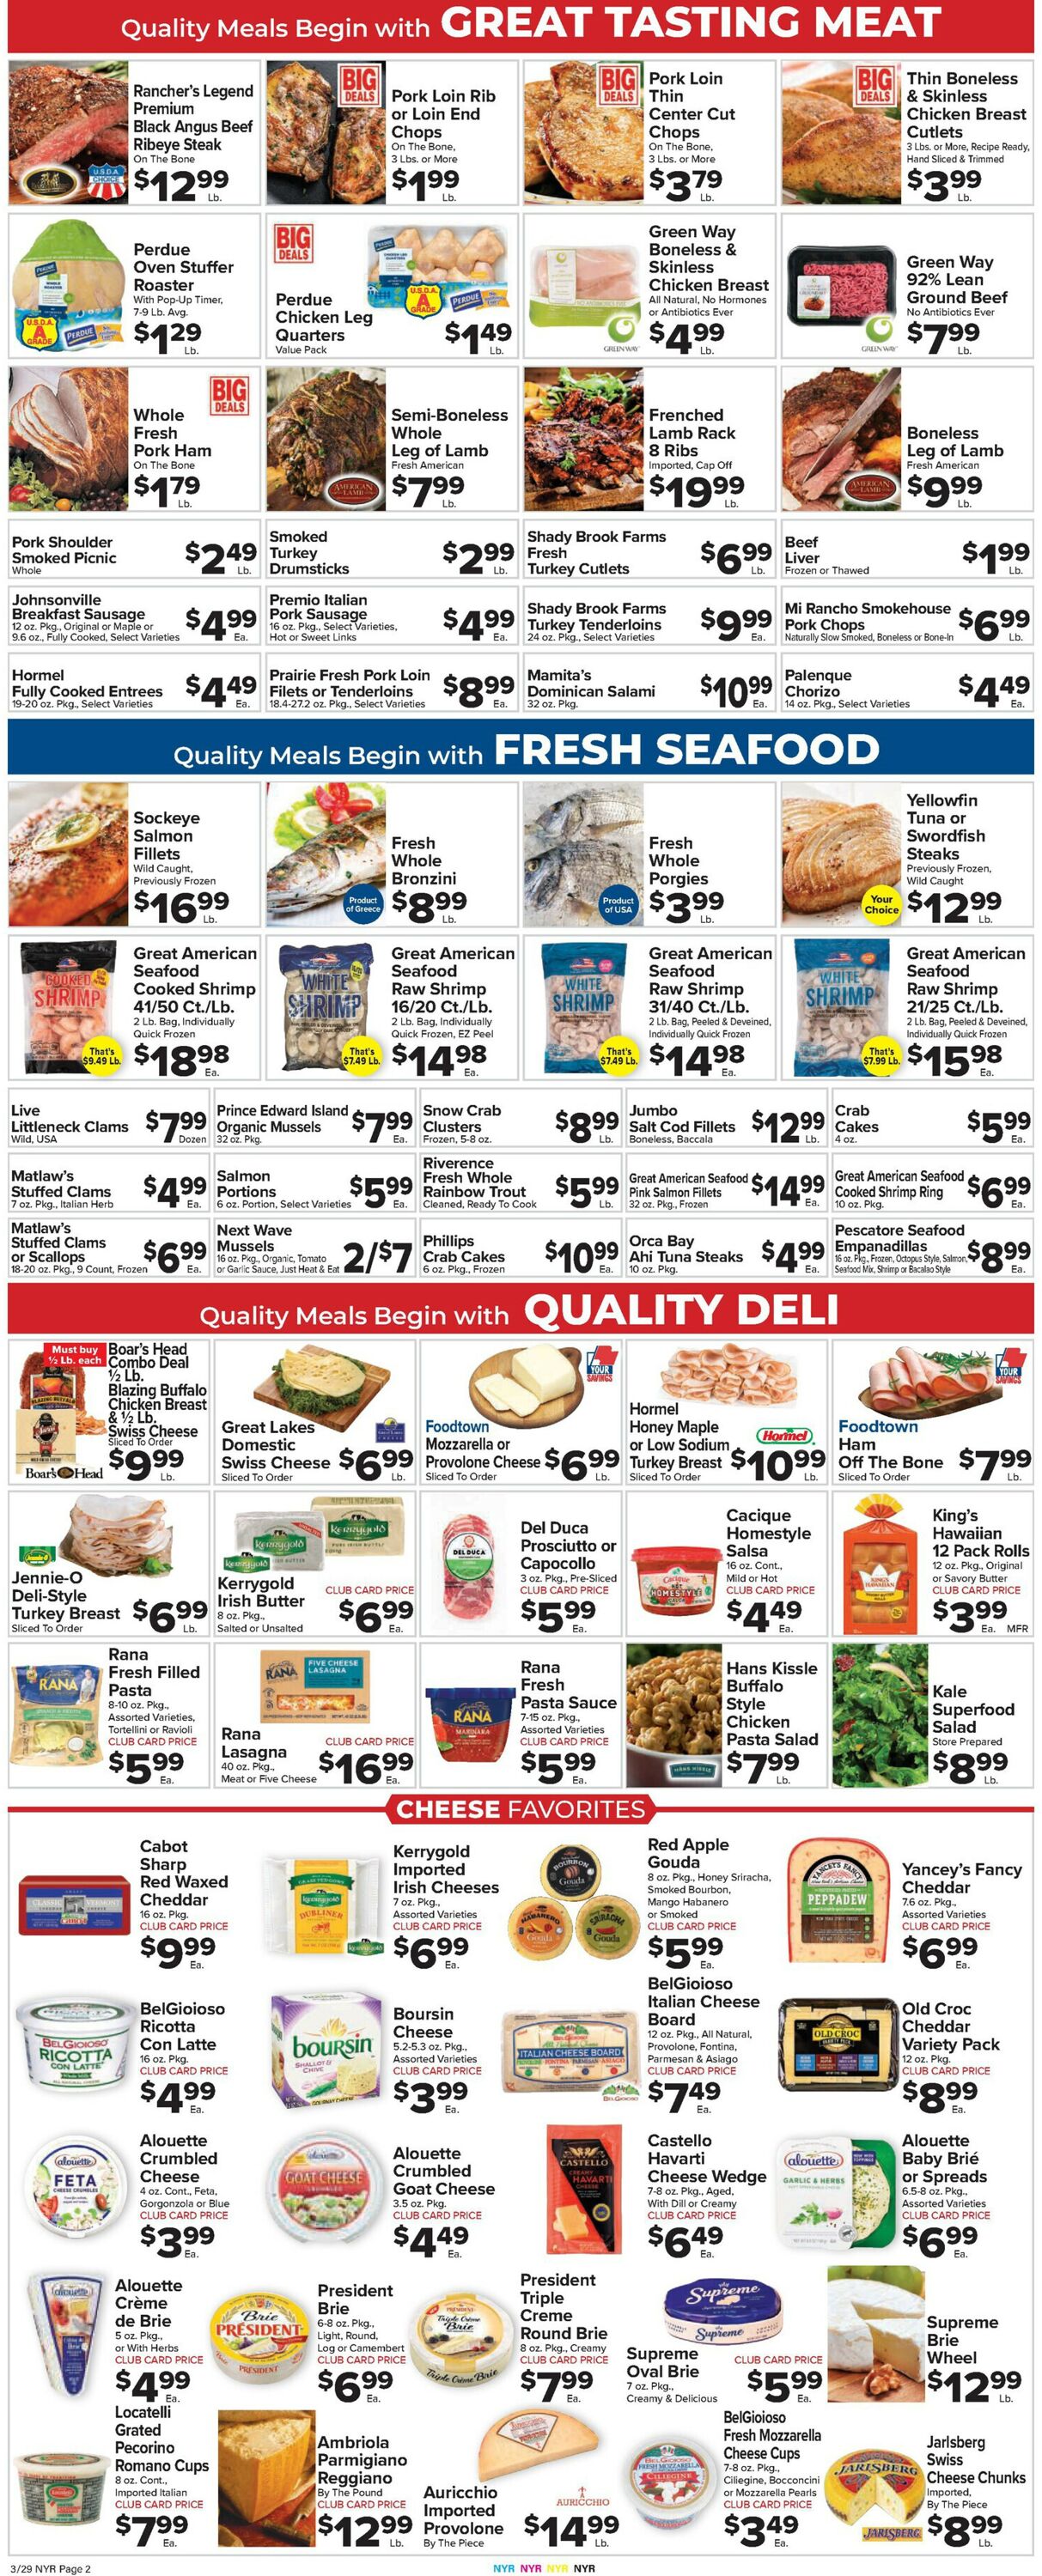 Catalogue Foodtown from 03/29/2024